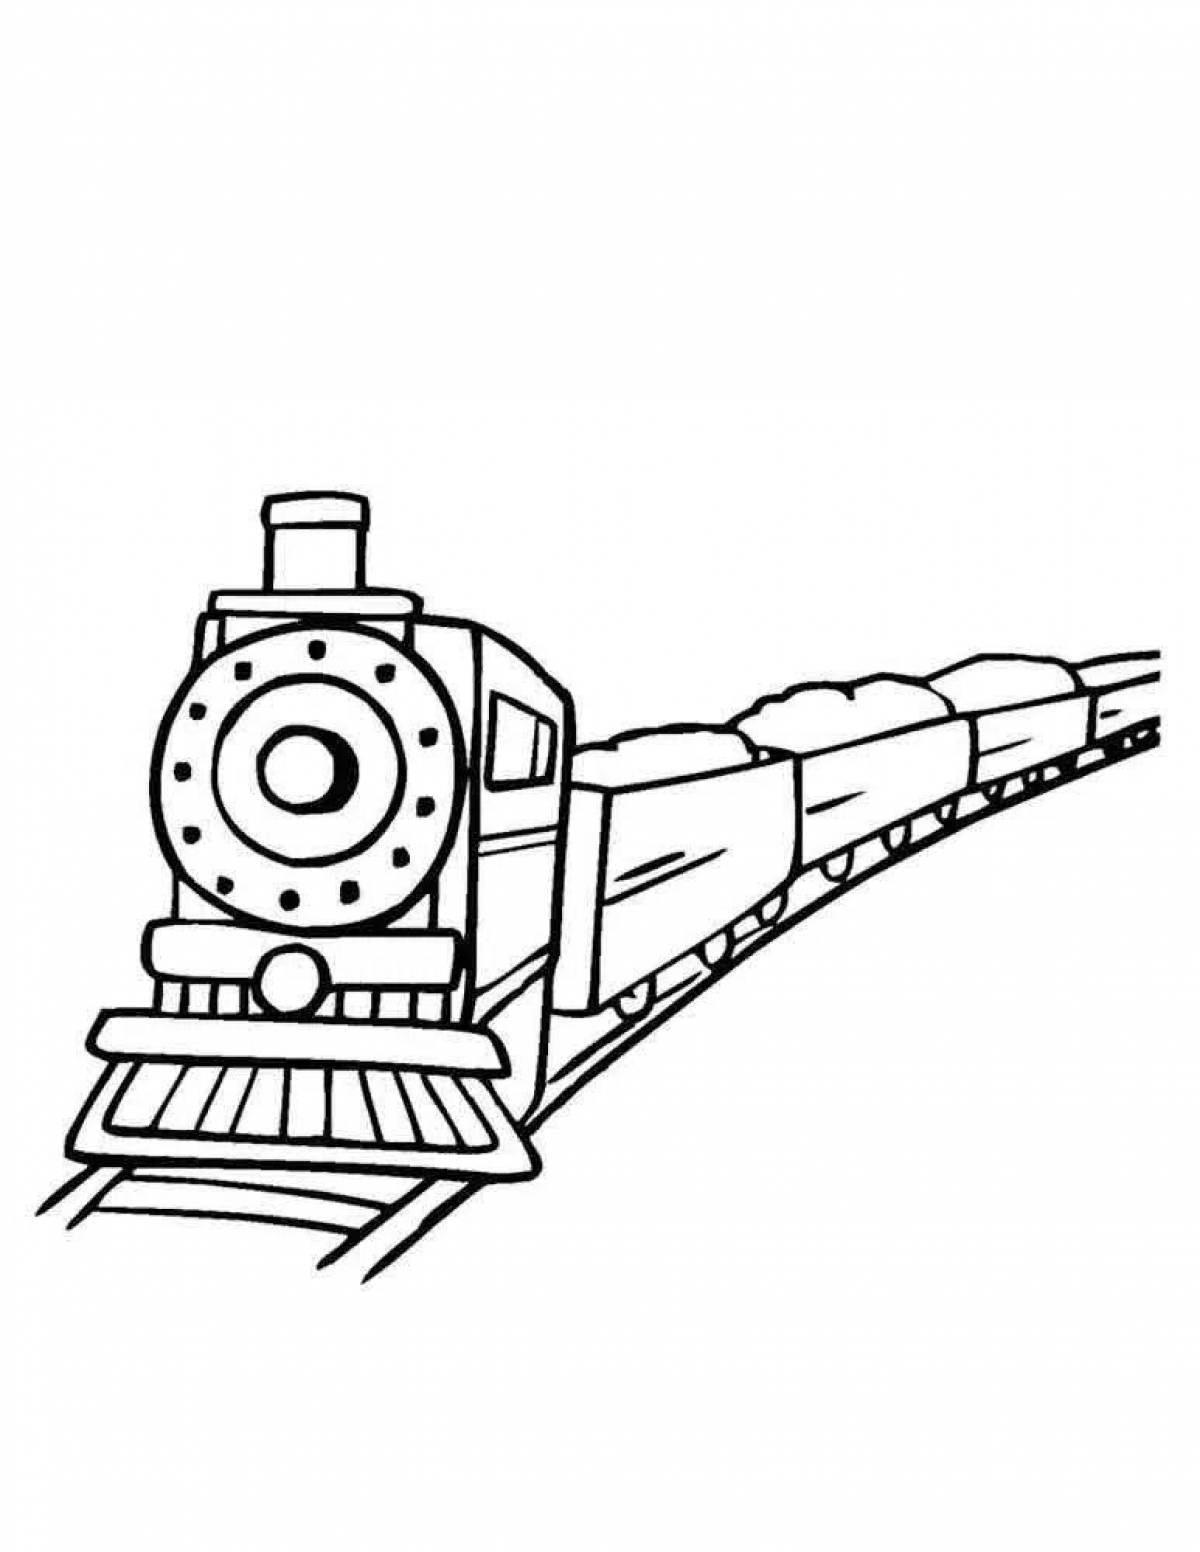 Glorious military train coloring page